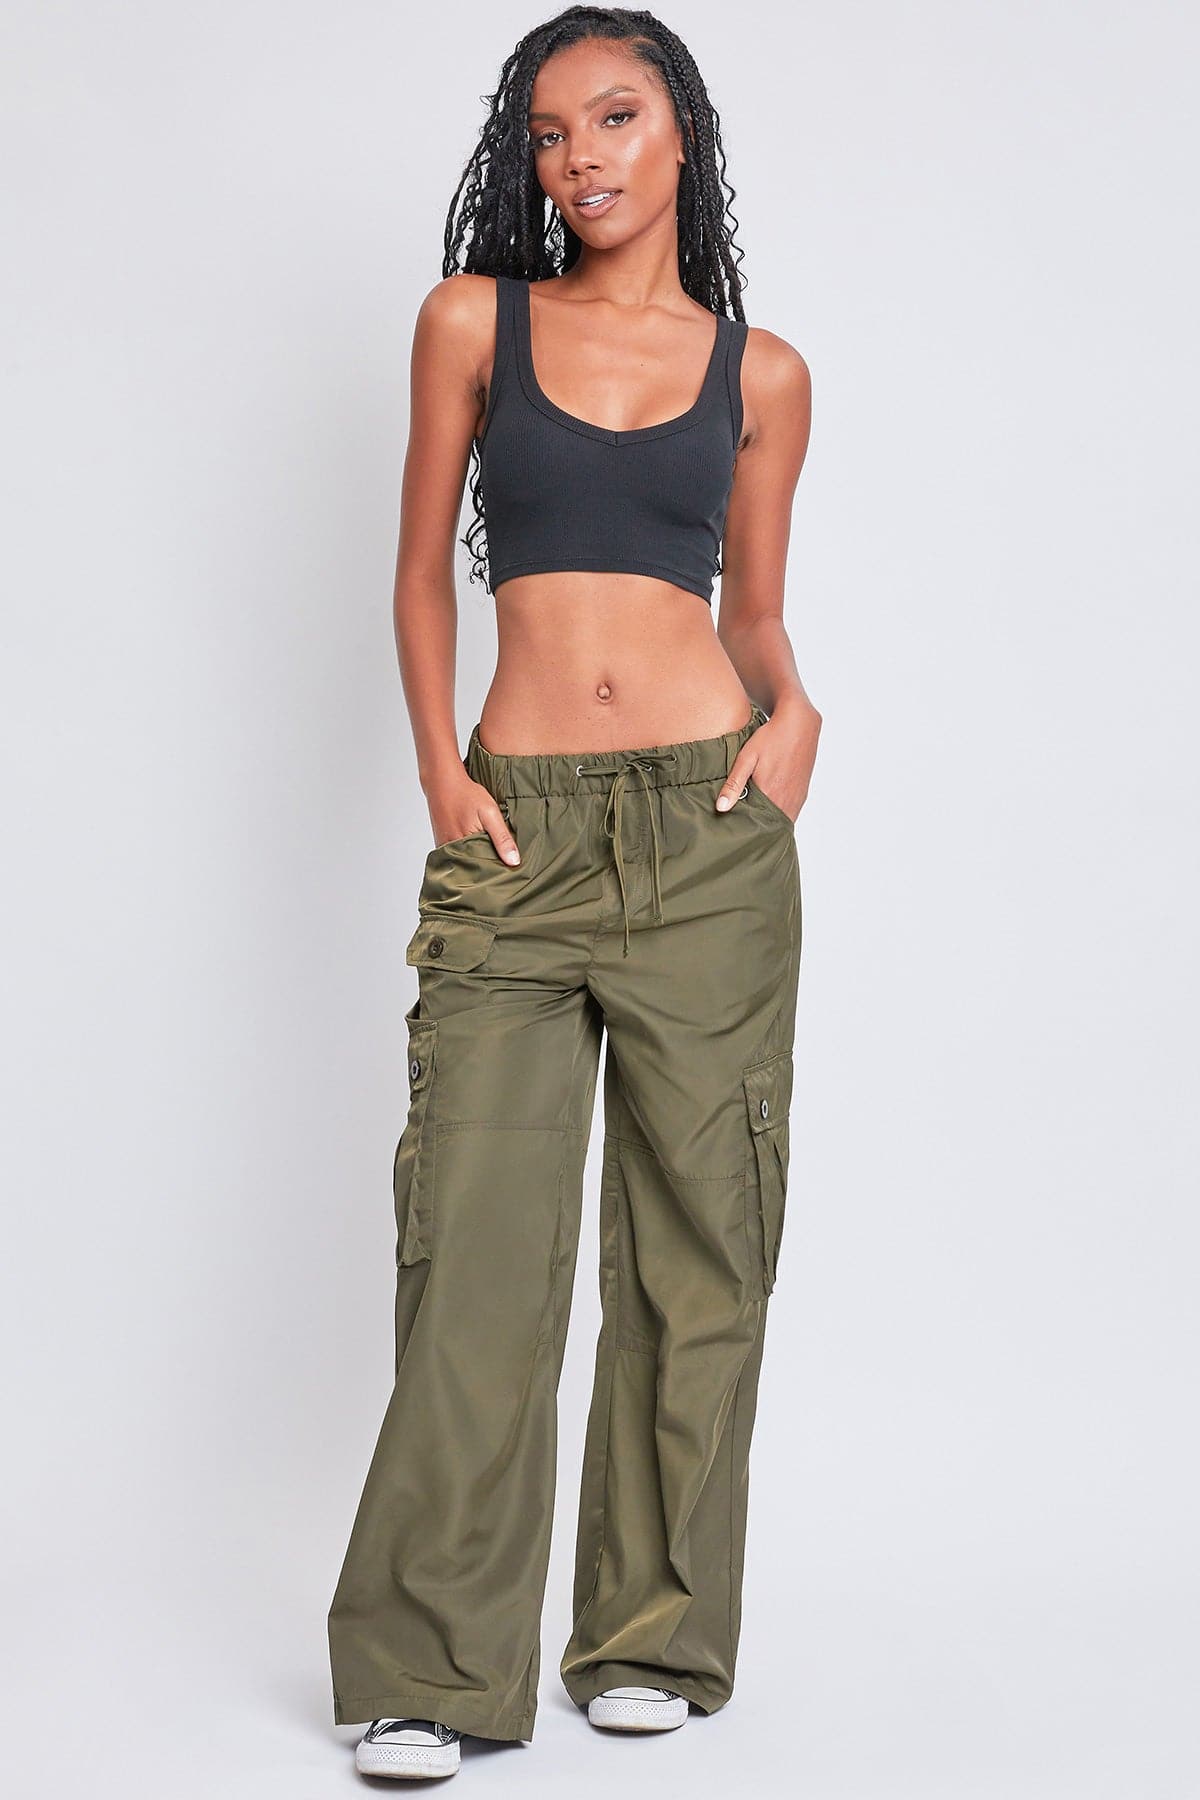 Women's Relaxed Cargo Pants